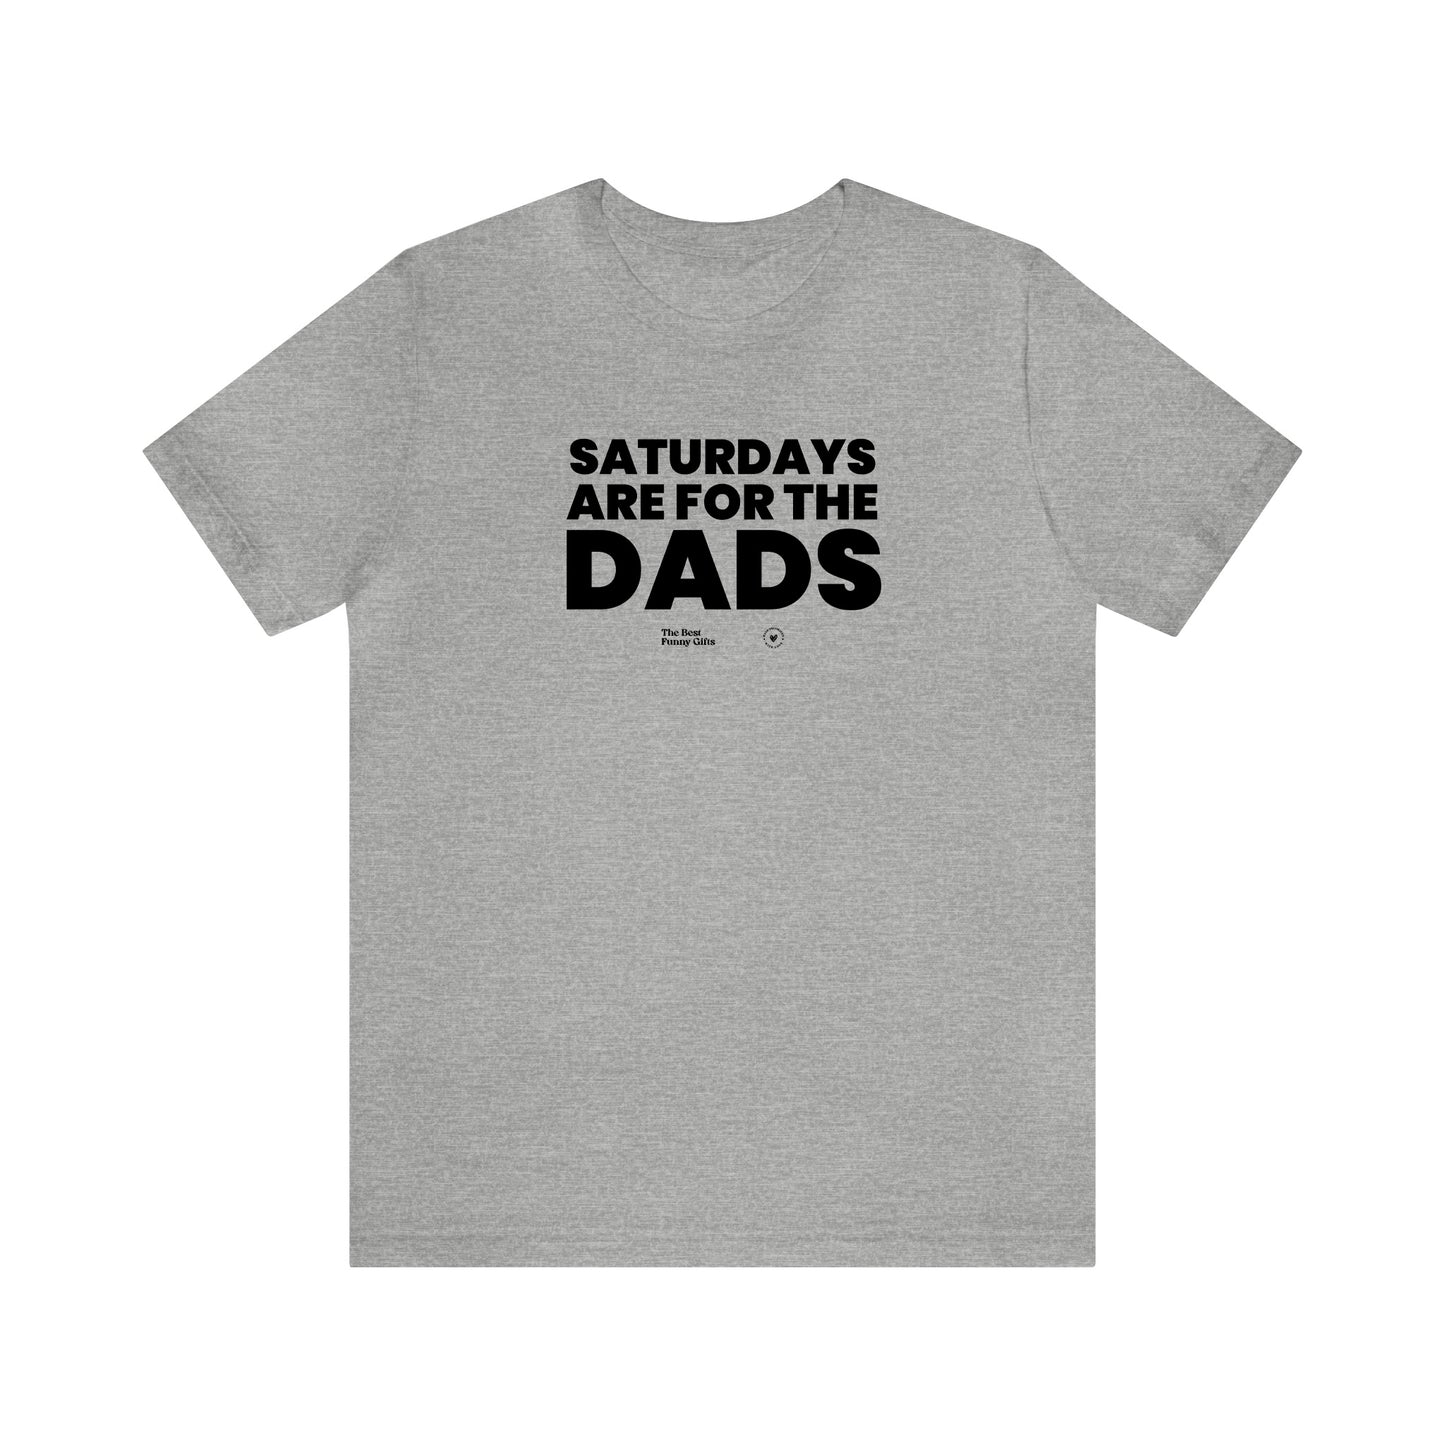 Mens T Shirts - Saturdays Are for the Dads - Funny Men T Shirts